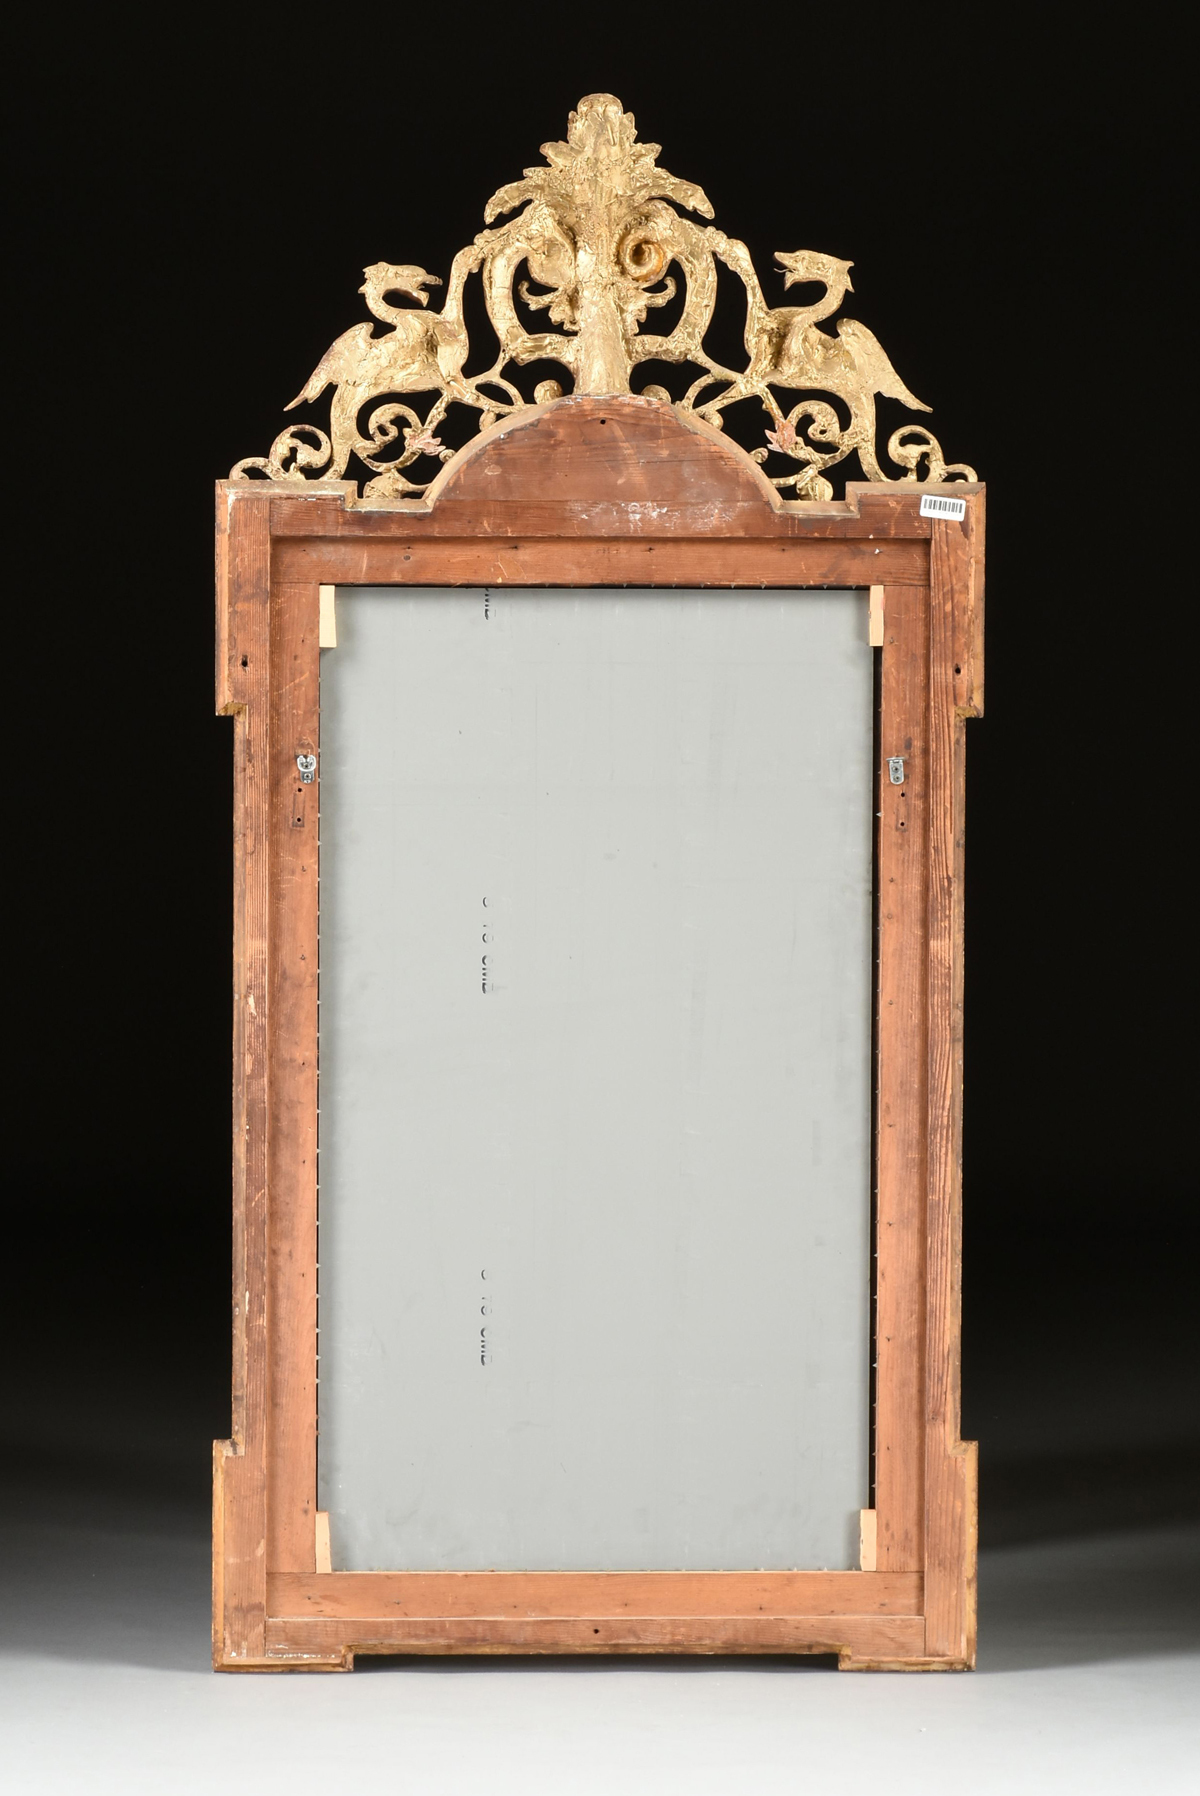 A RENAISSANCE REVIVAL GILT AND CARVED WOOD PIER MIRROR, FRENCH, THIRD QUARTER 19TH CENTURY, with a - Image 5 of 5